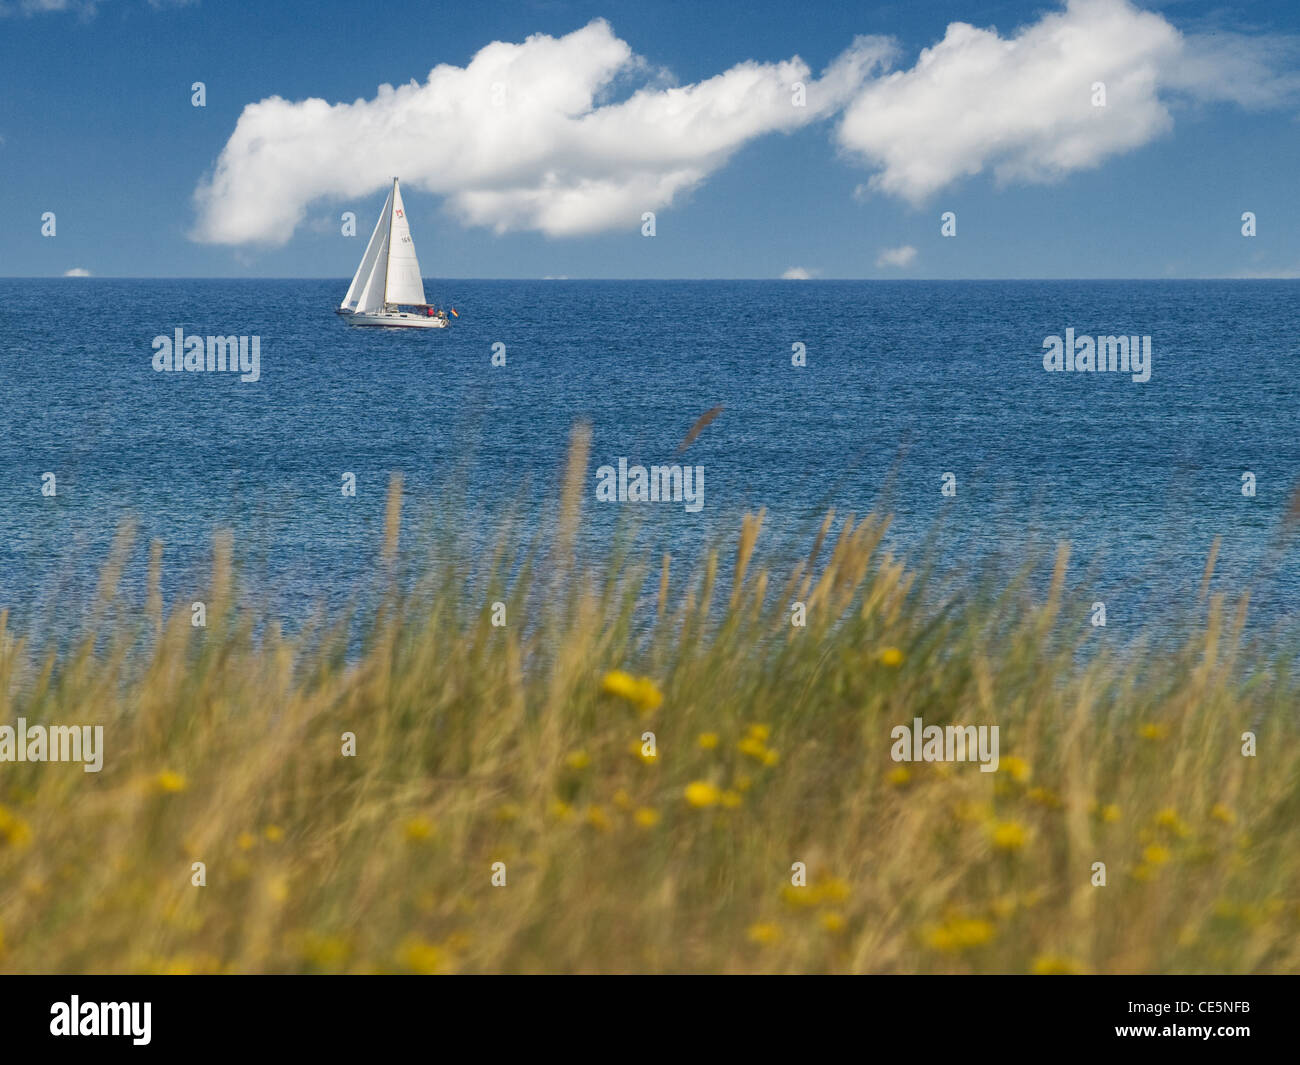 a sailer in front of the coastline Stock Photo